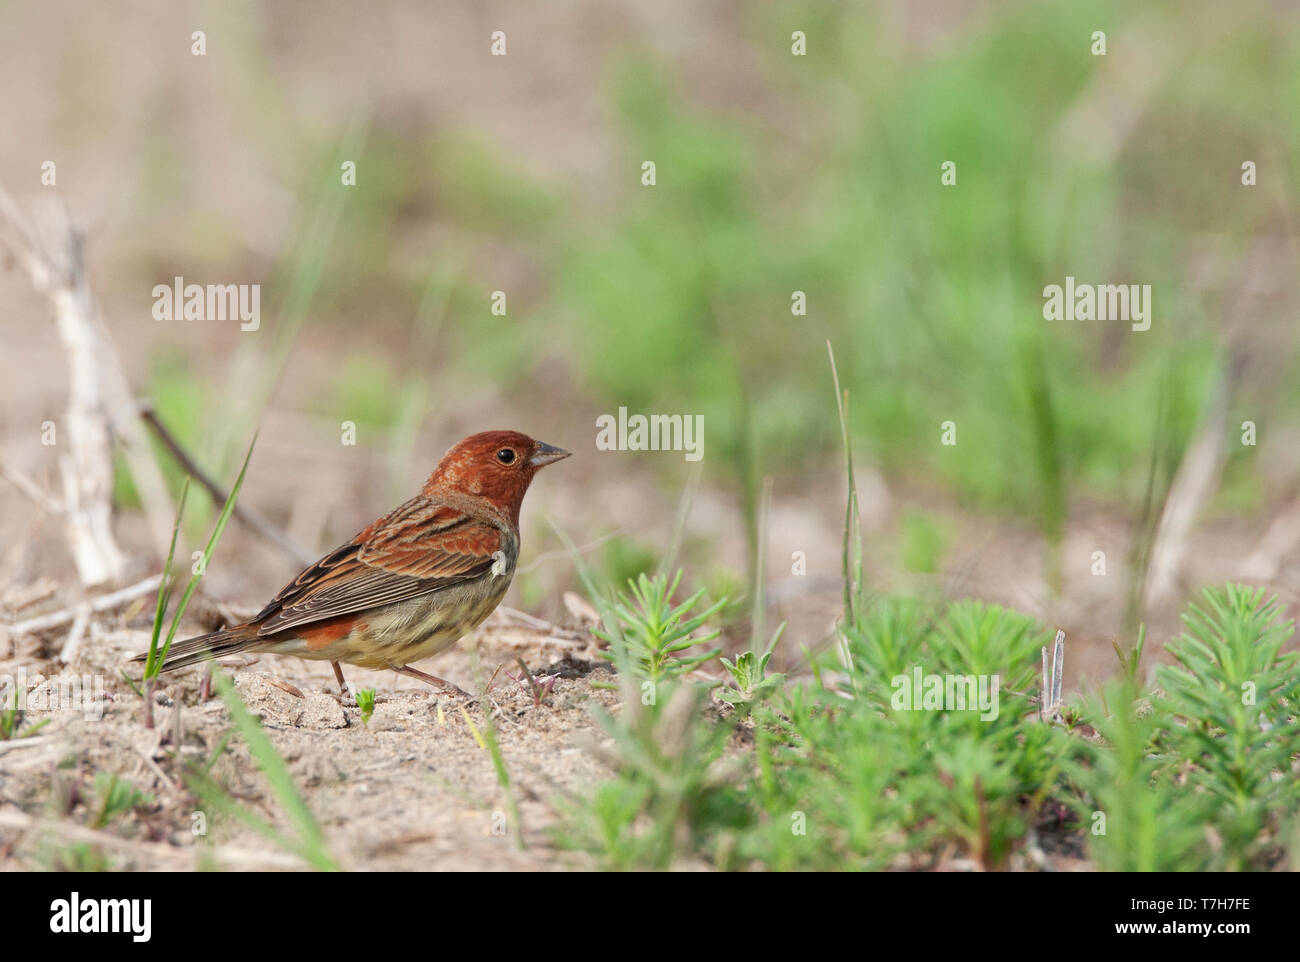 Chestnut bunting in the grass Stock Photo